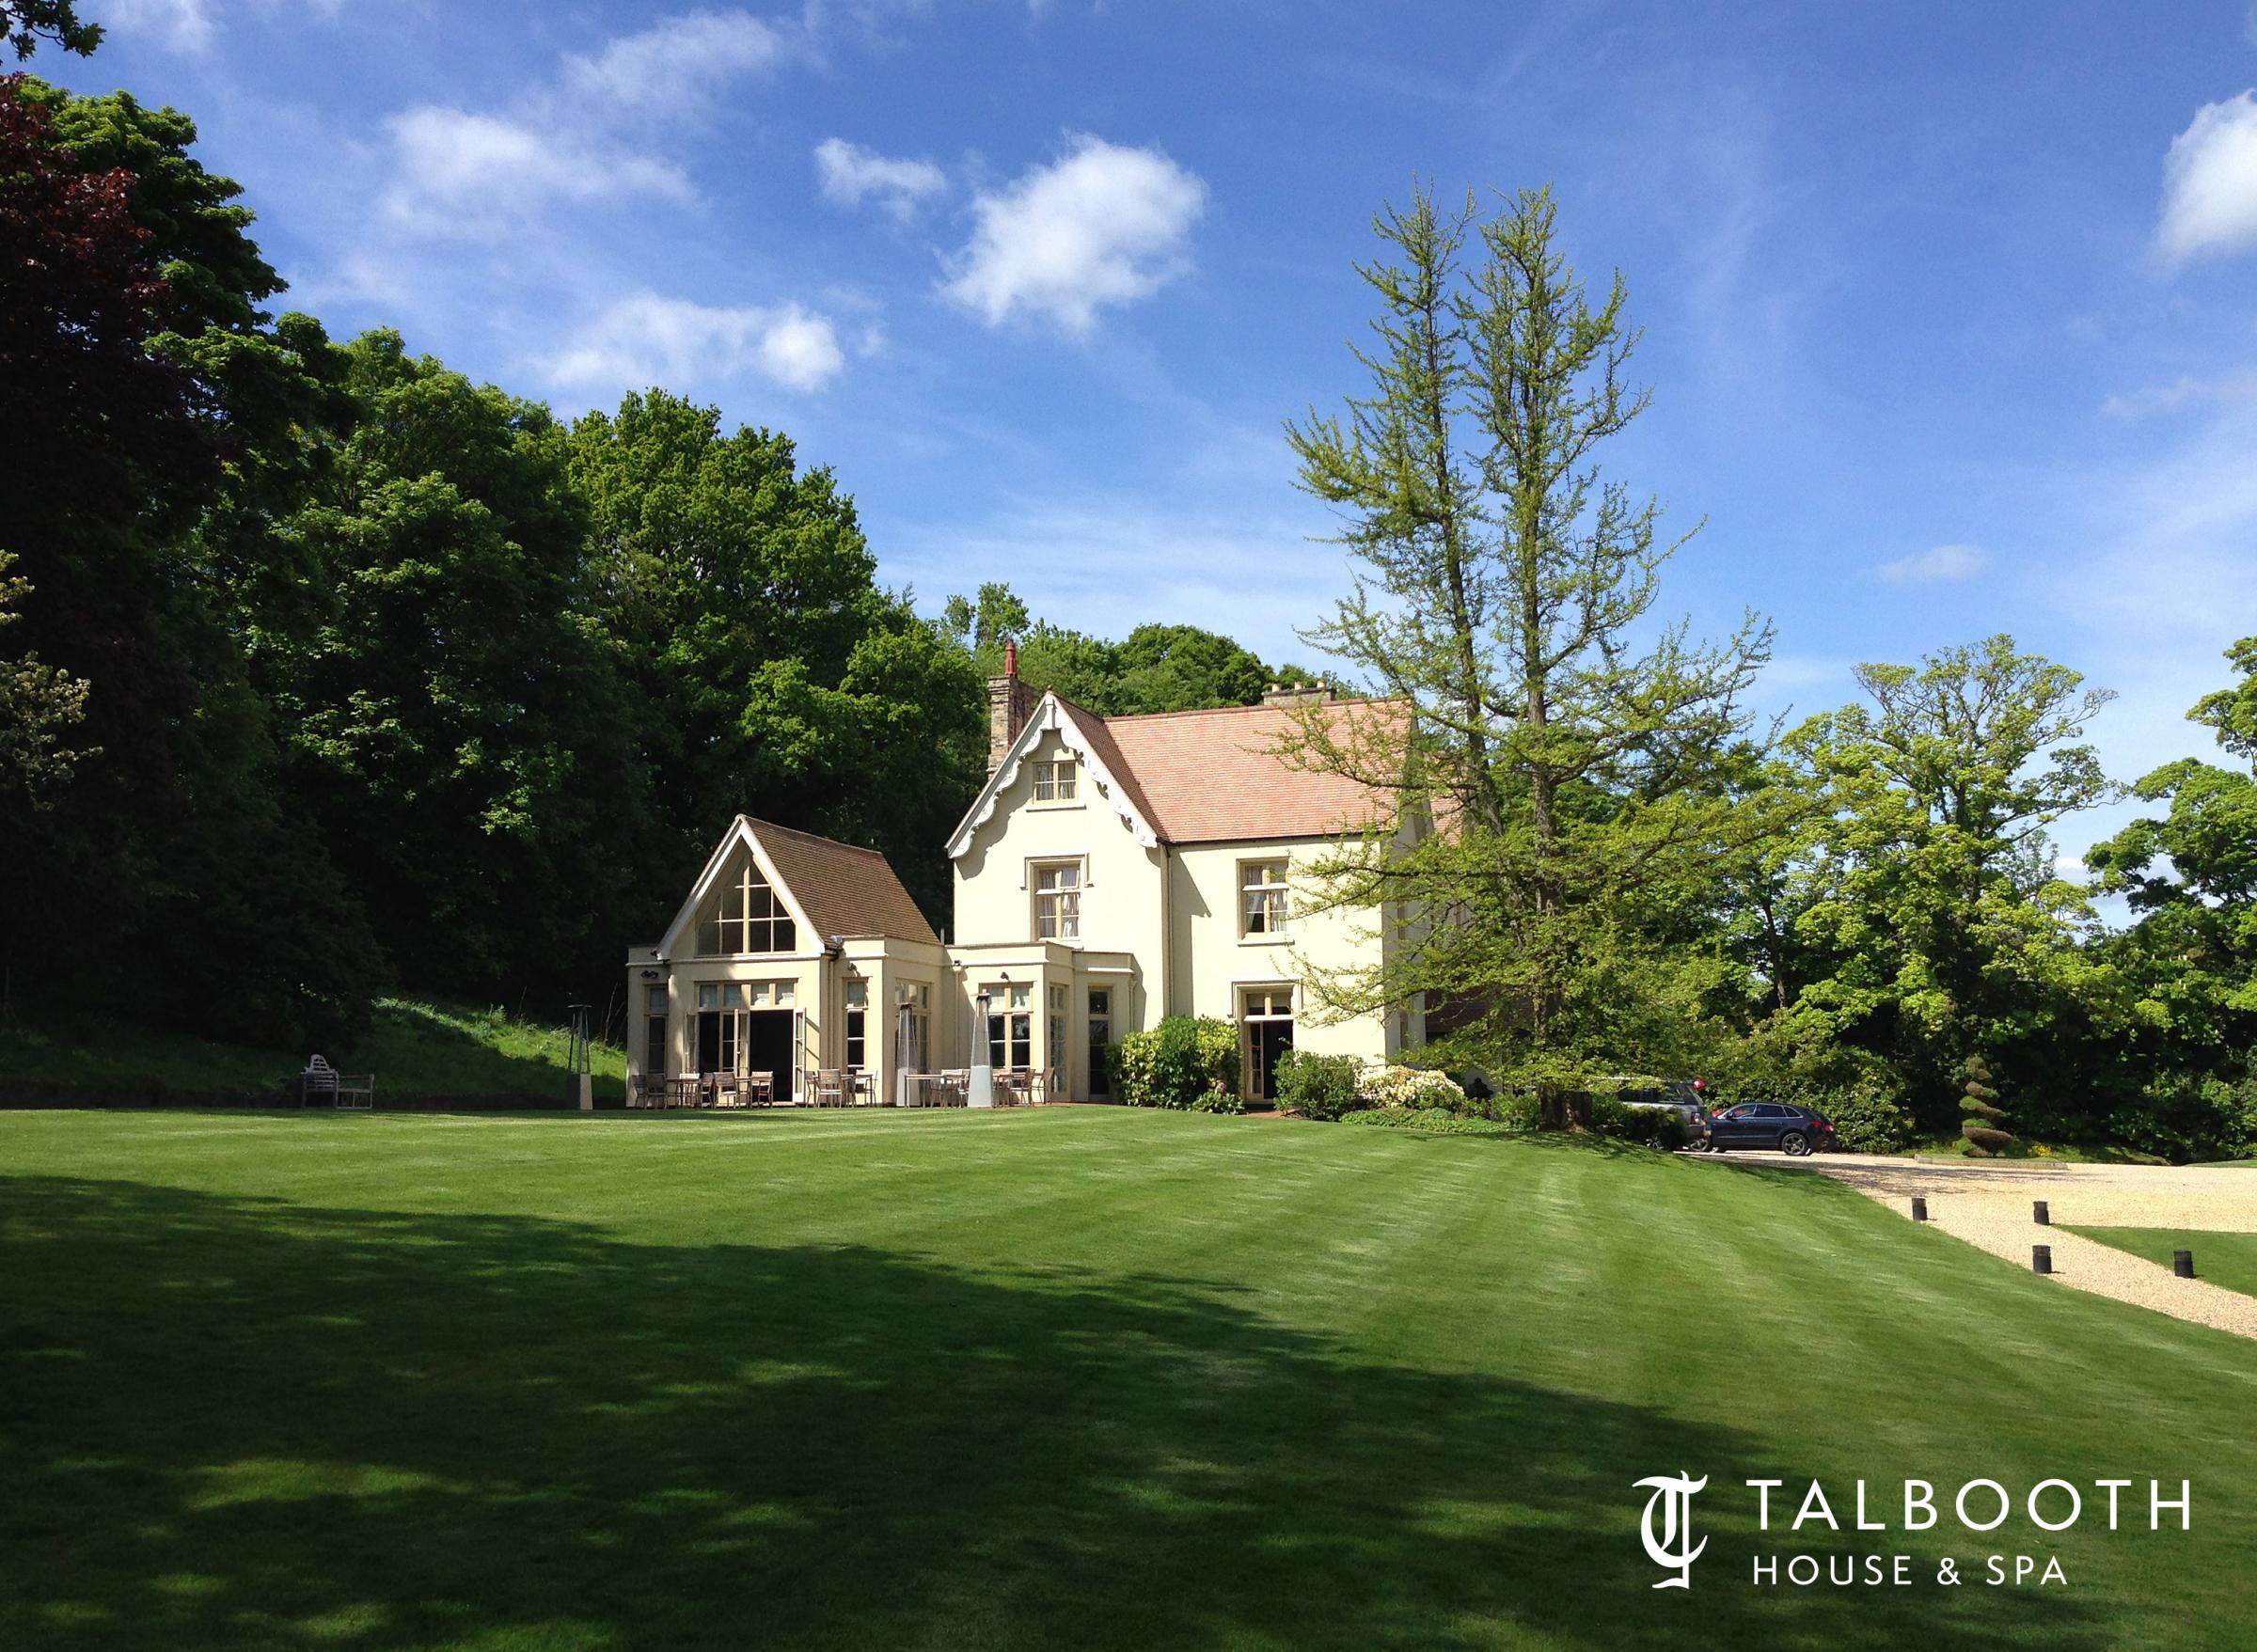 Rebrand - Relax - the Maison Talboith Hotel will go by the name Talbooth House & Spa 